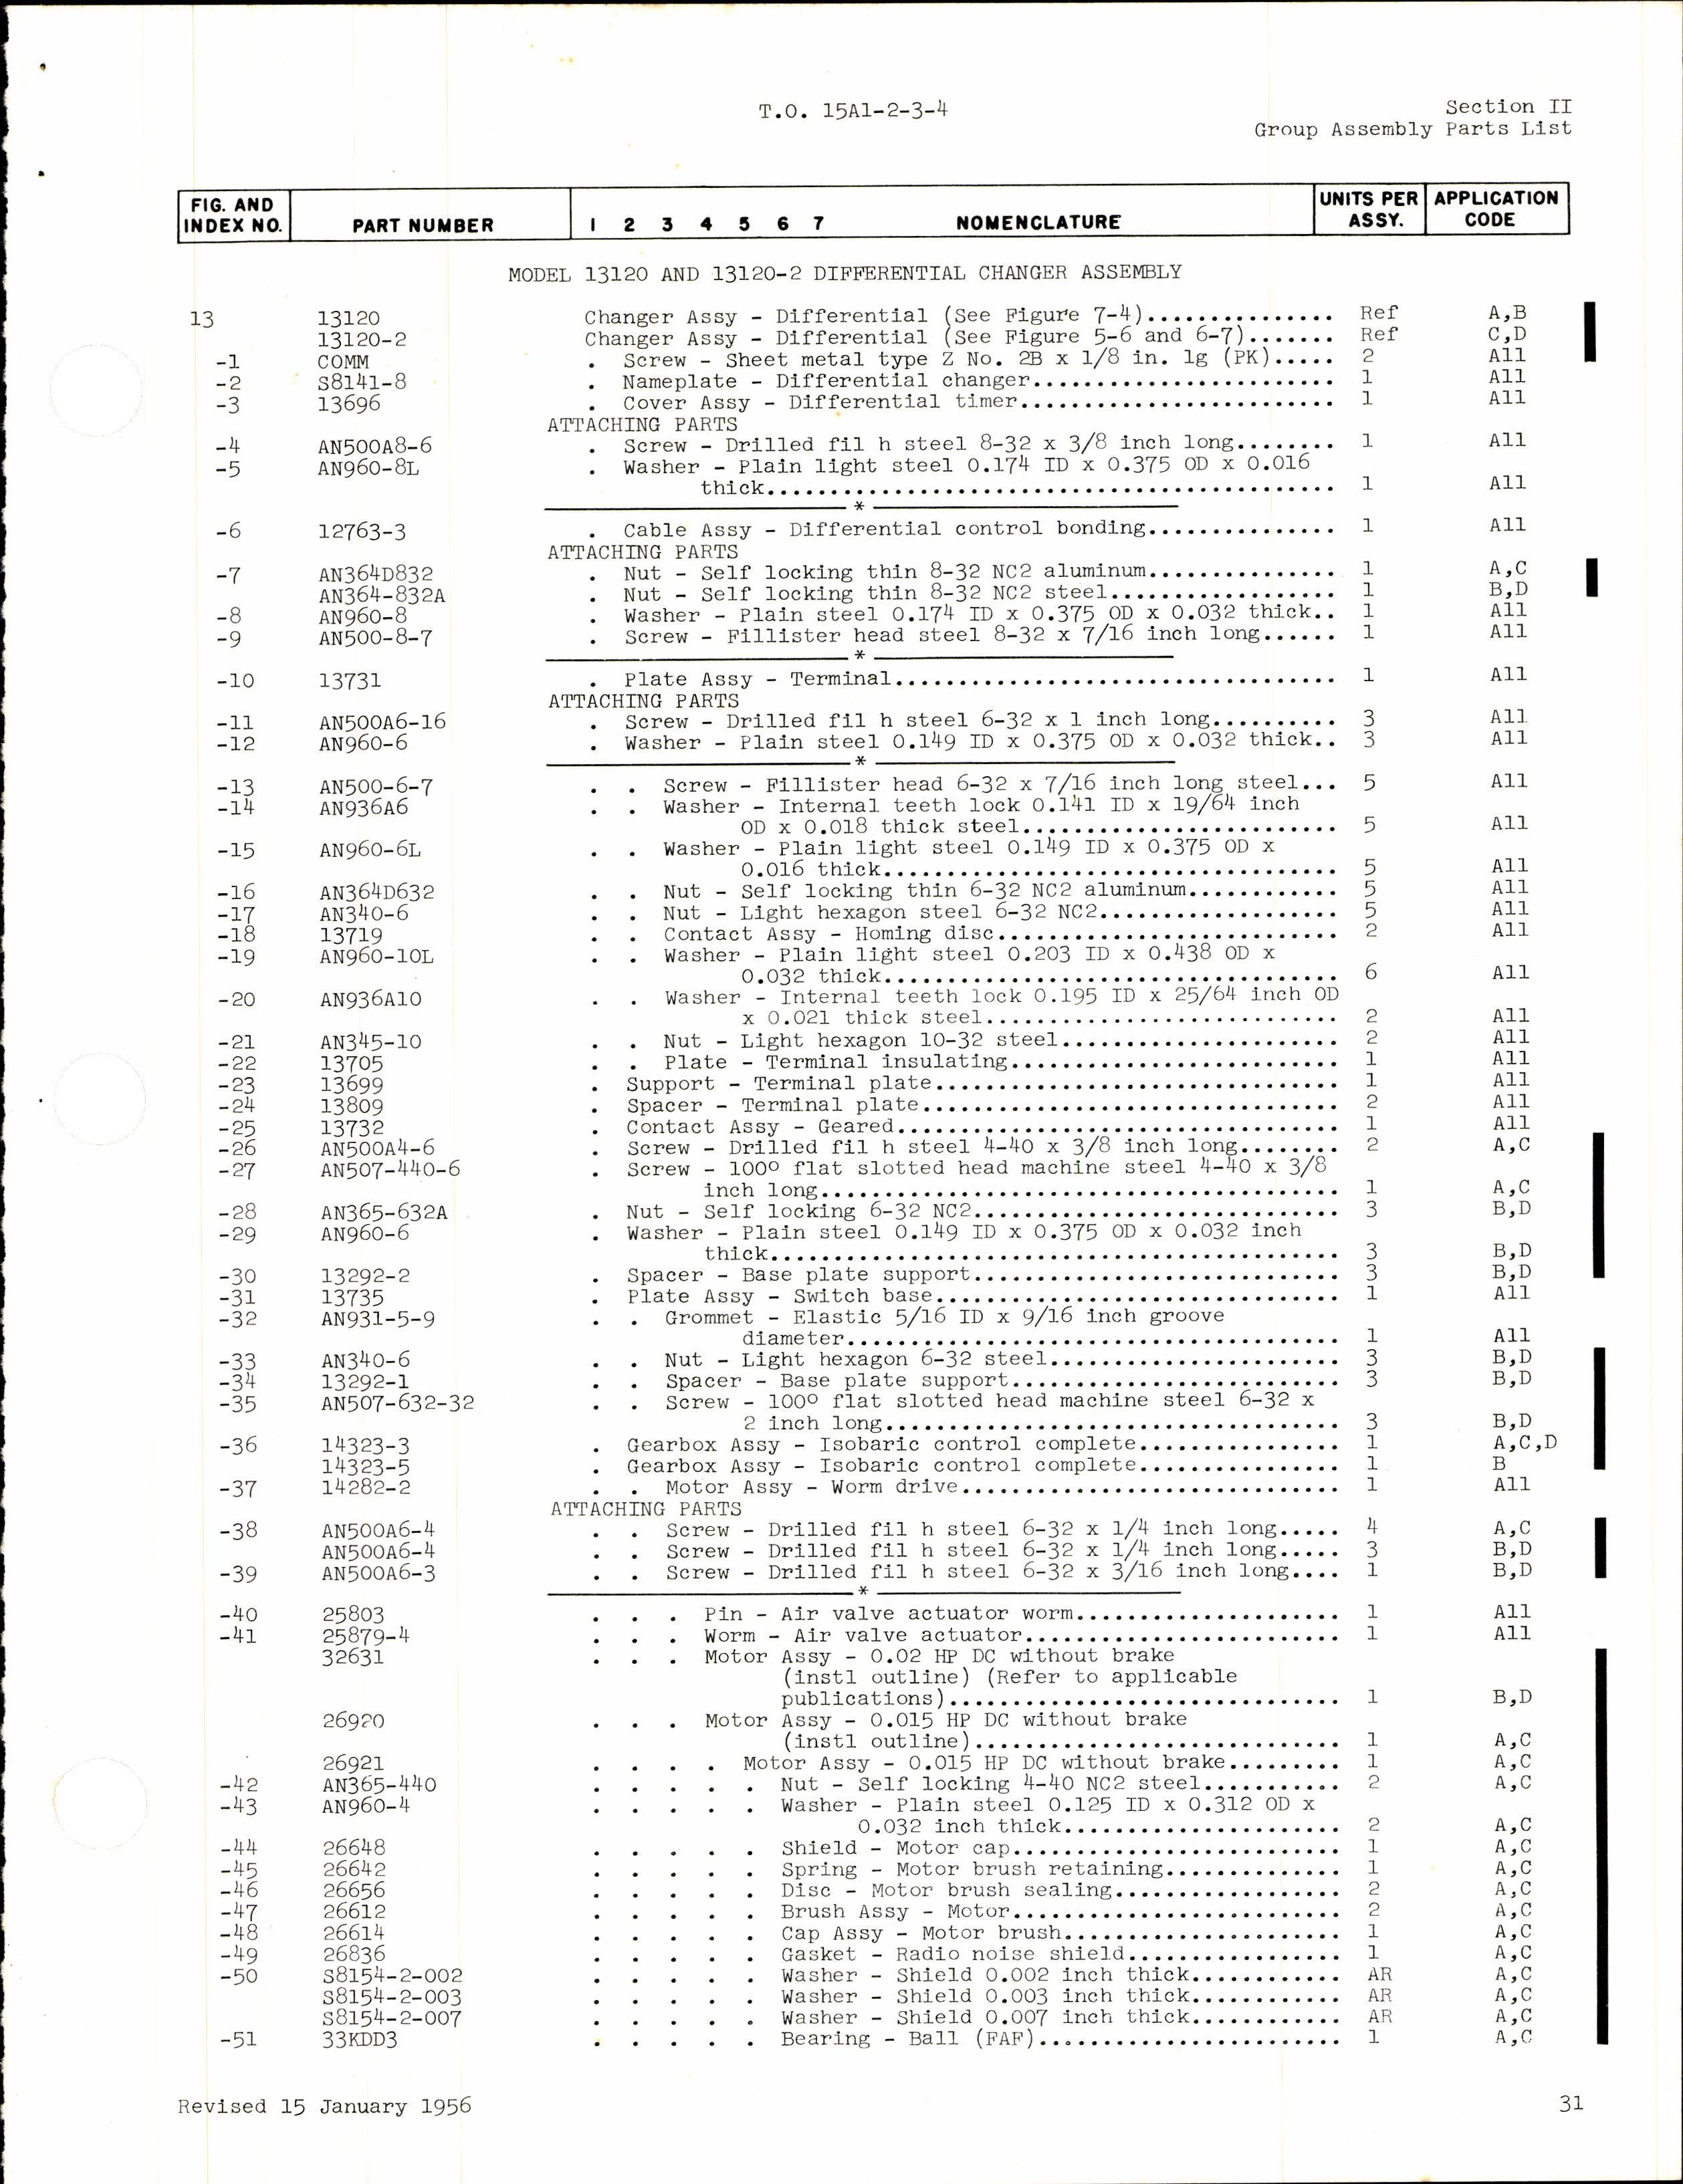 Sample page 25 from AirCorps Library document: Parts Catalog for Airesearch Cabin Pressure Regulators